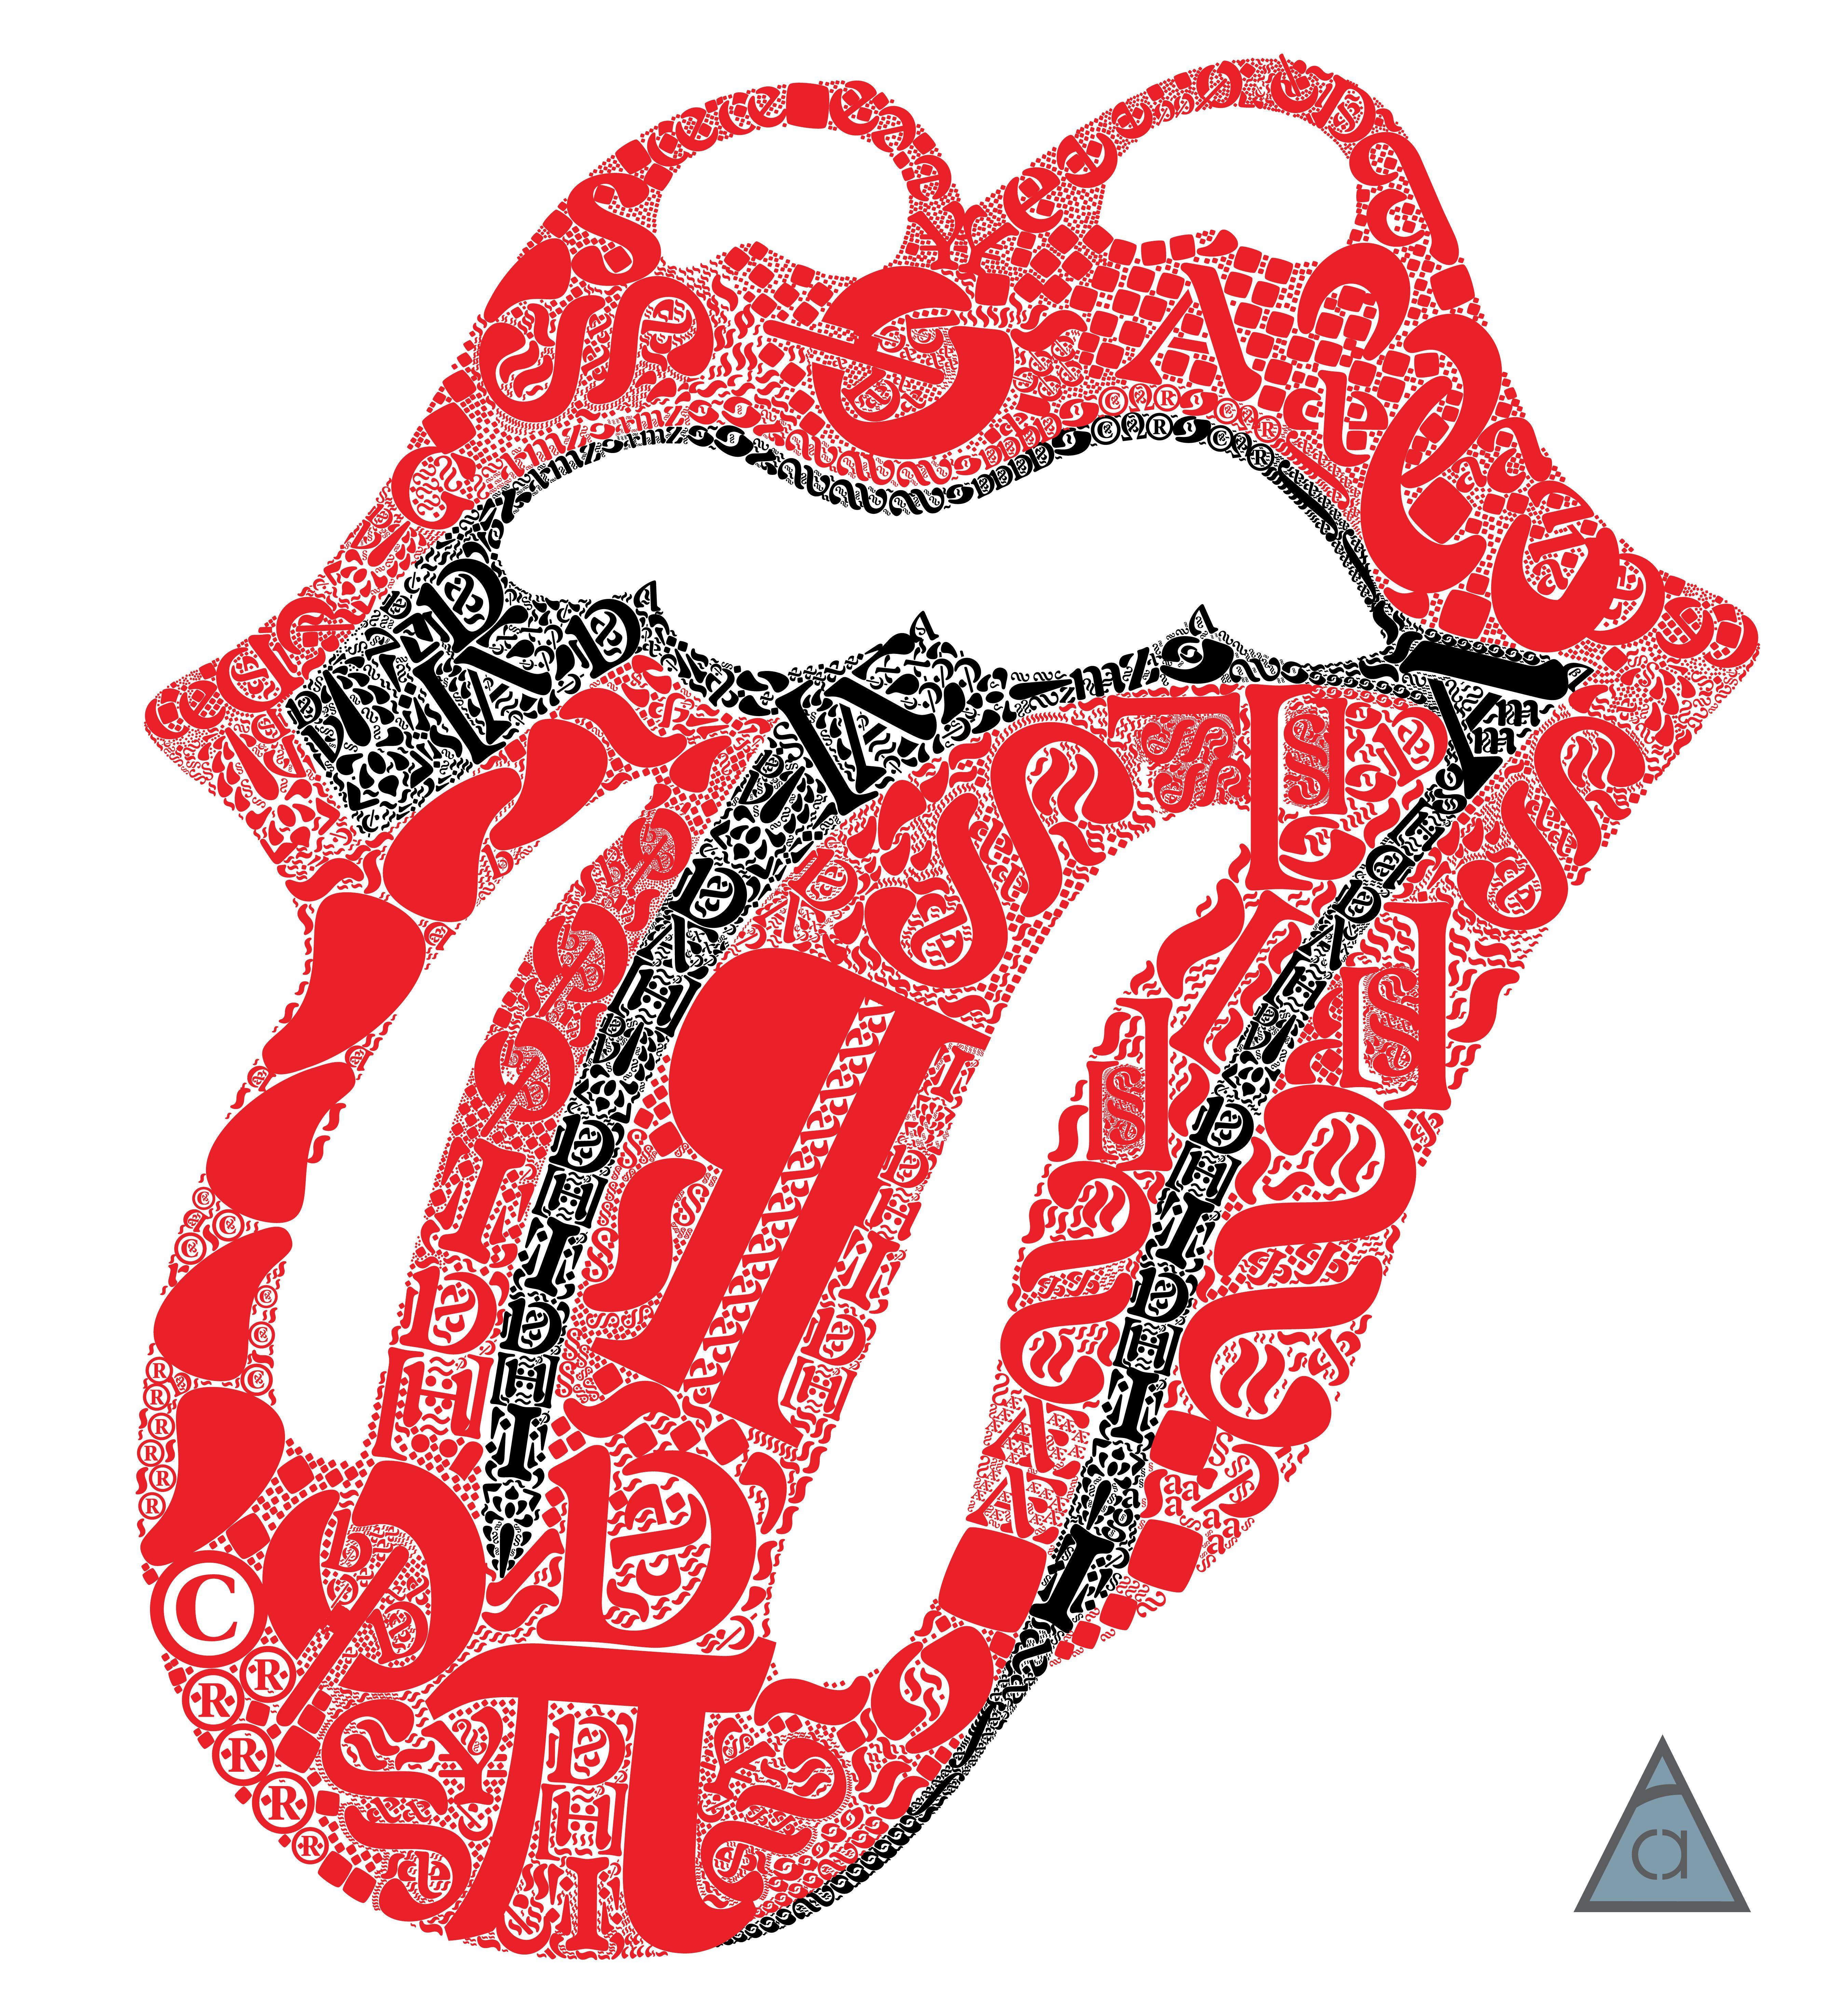 Adorable Rolling Stones Logo Wallpaper in High Quality